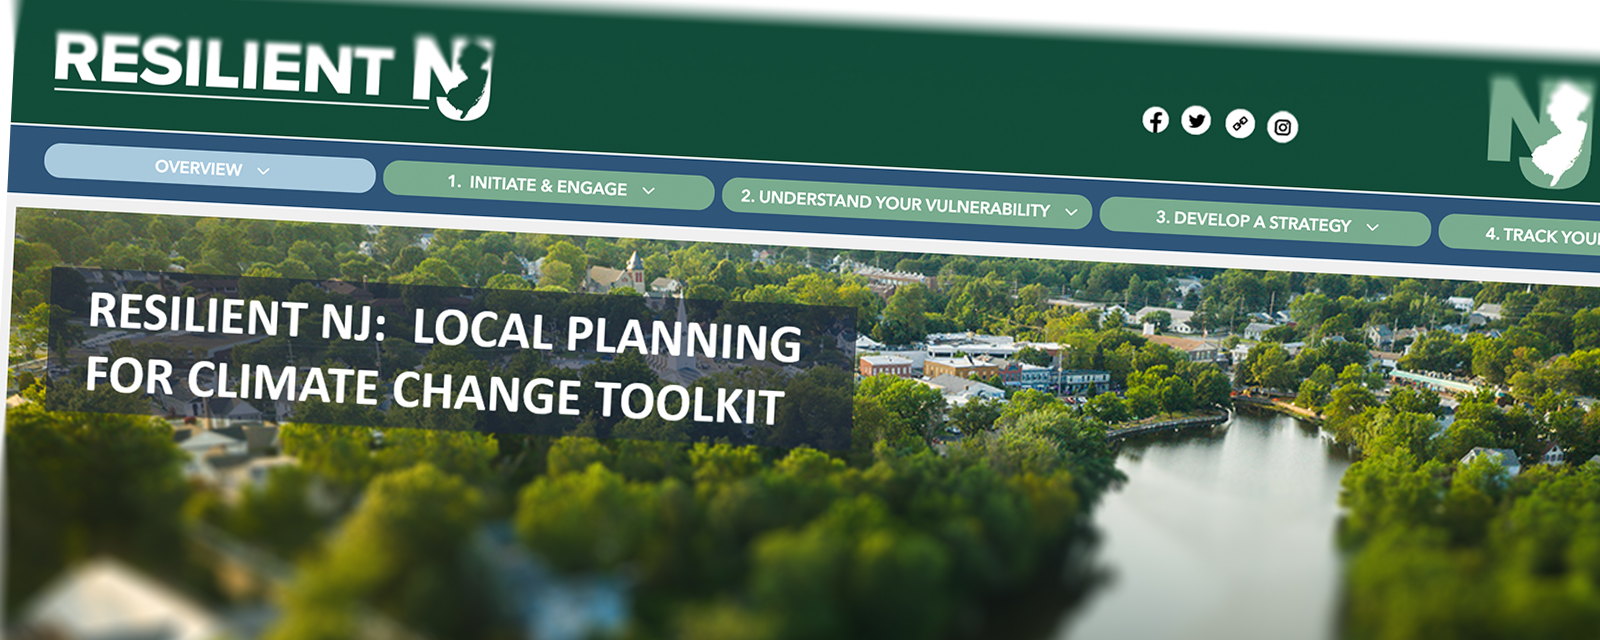 Resilient NJ: Local Planning for Climate Change Toolkit